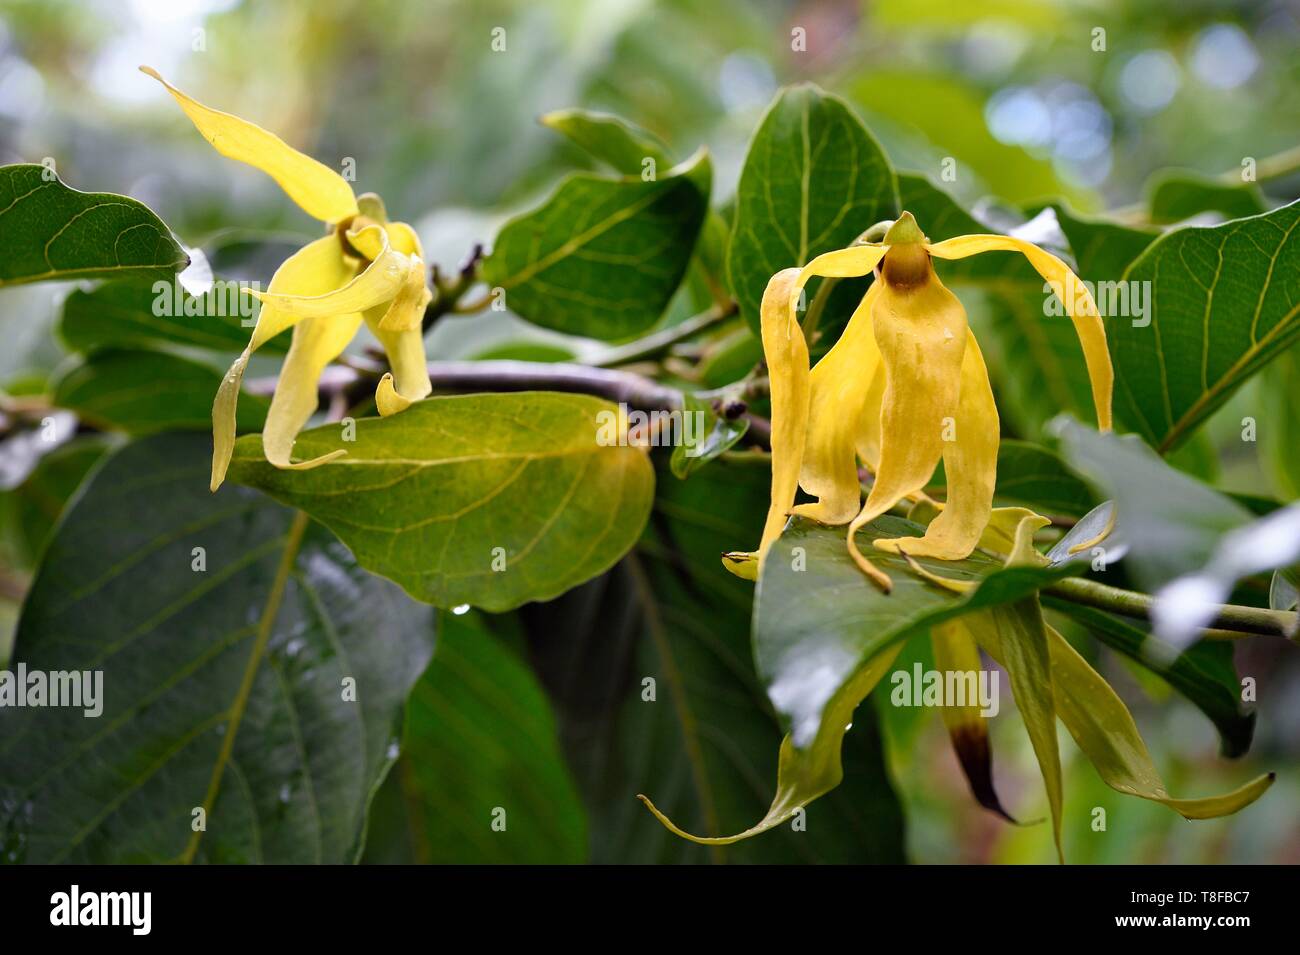 France, Mayotte island (French overseas department), Grande Terre, Ouangani, ylang ylang (Cananga odorata) flowers and their foliage Stock Photo